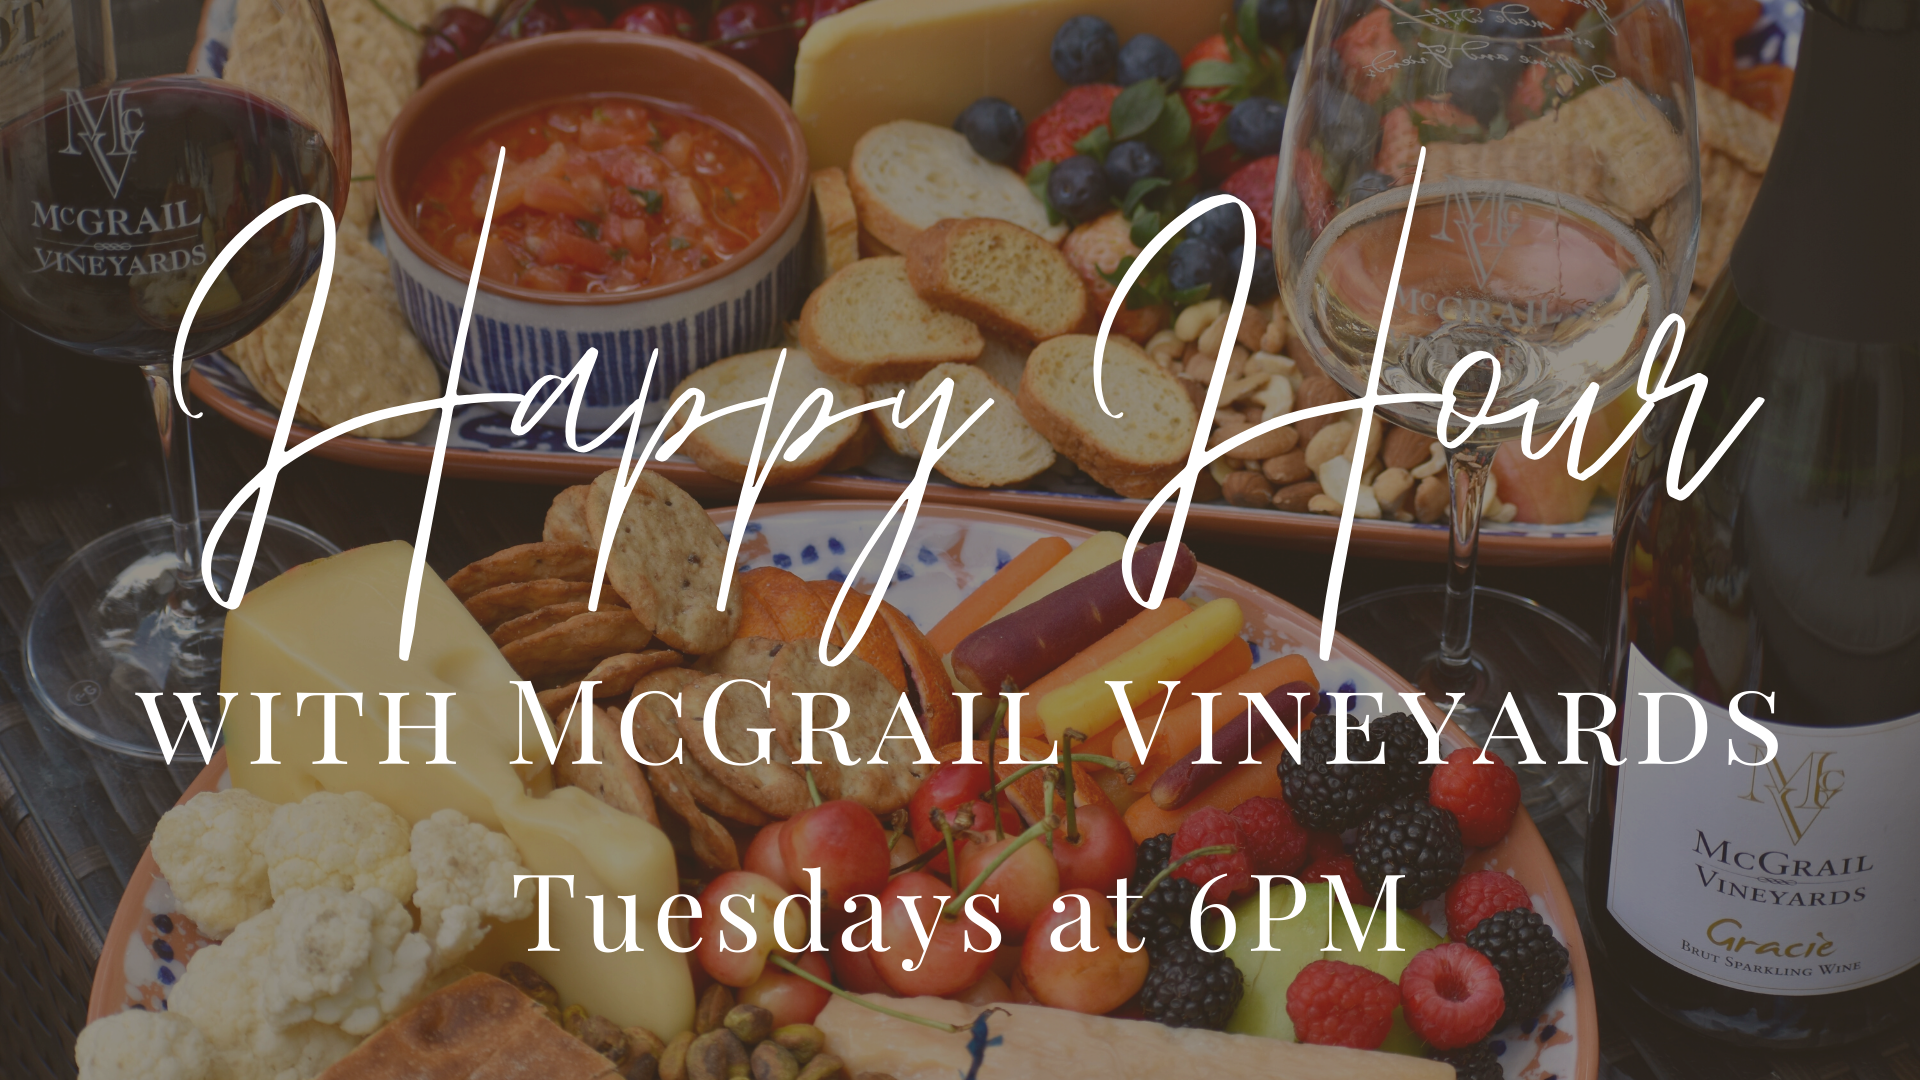 POSTPONED - Happy Hour with McGrail Vineyards Featuring Cris and Gillian Live on Facebook